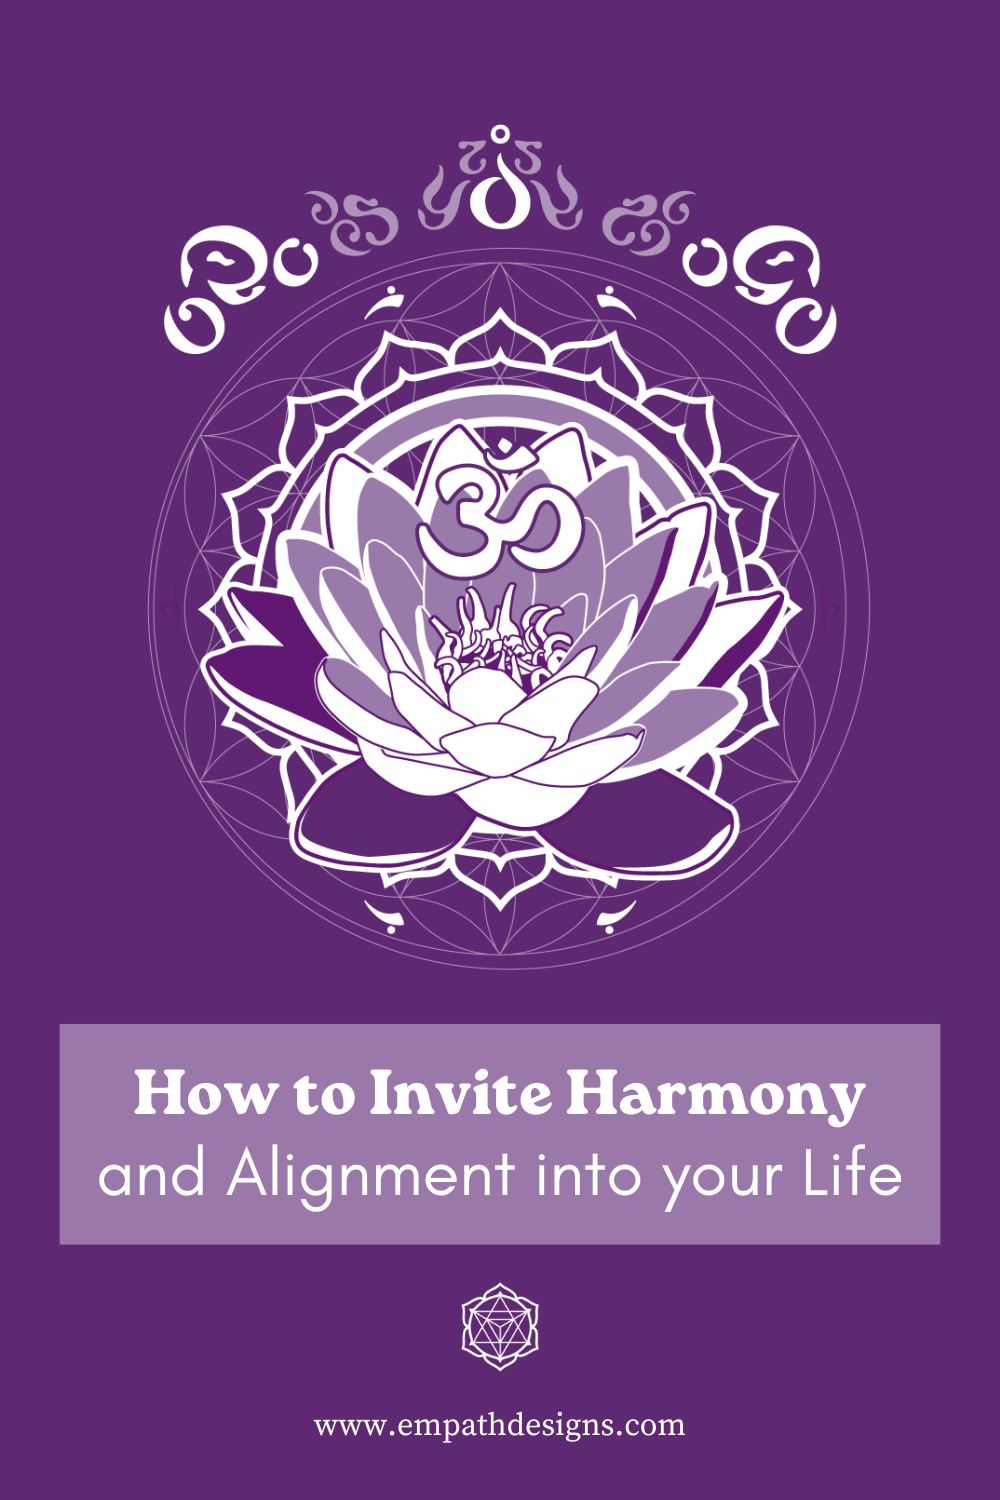 How to Invite Harmony and Alignment into Your Life